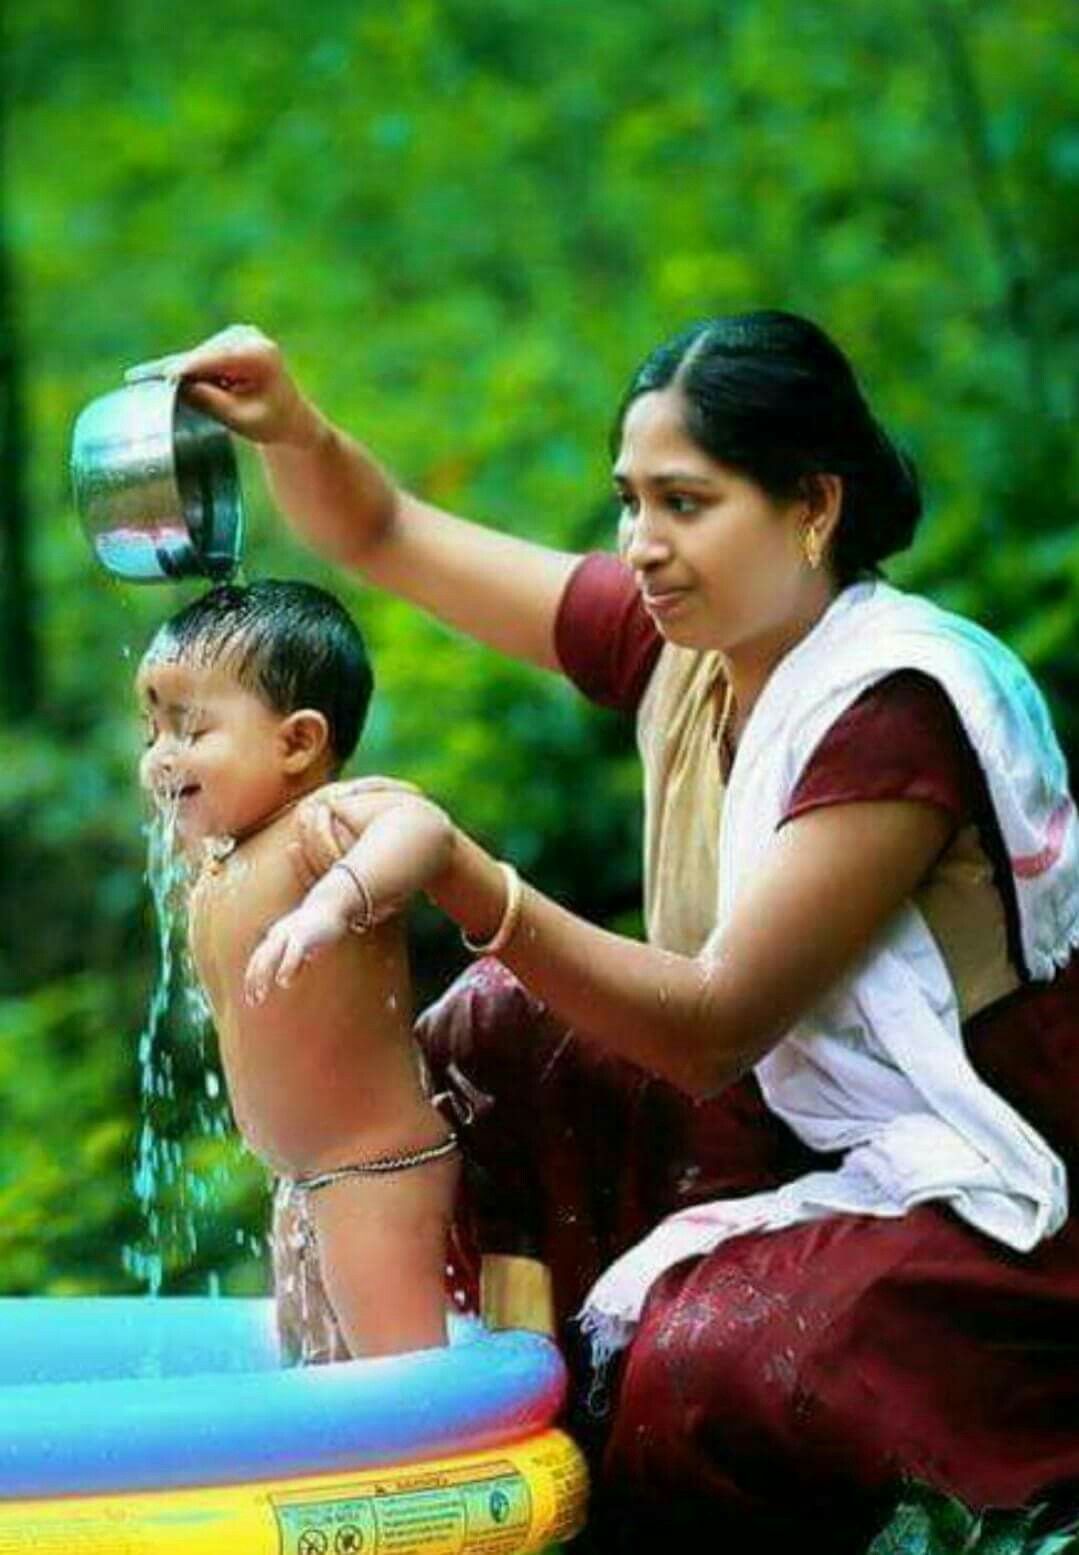 Kerala Woman bathing the child. Mother in the private sphere taking care of the child. Mother baby photography, Village photography, Baby art picture